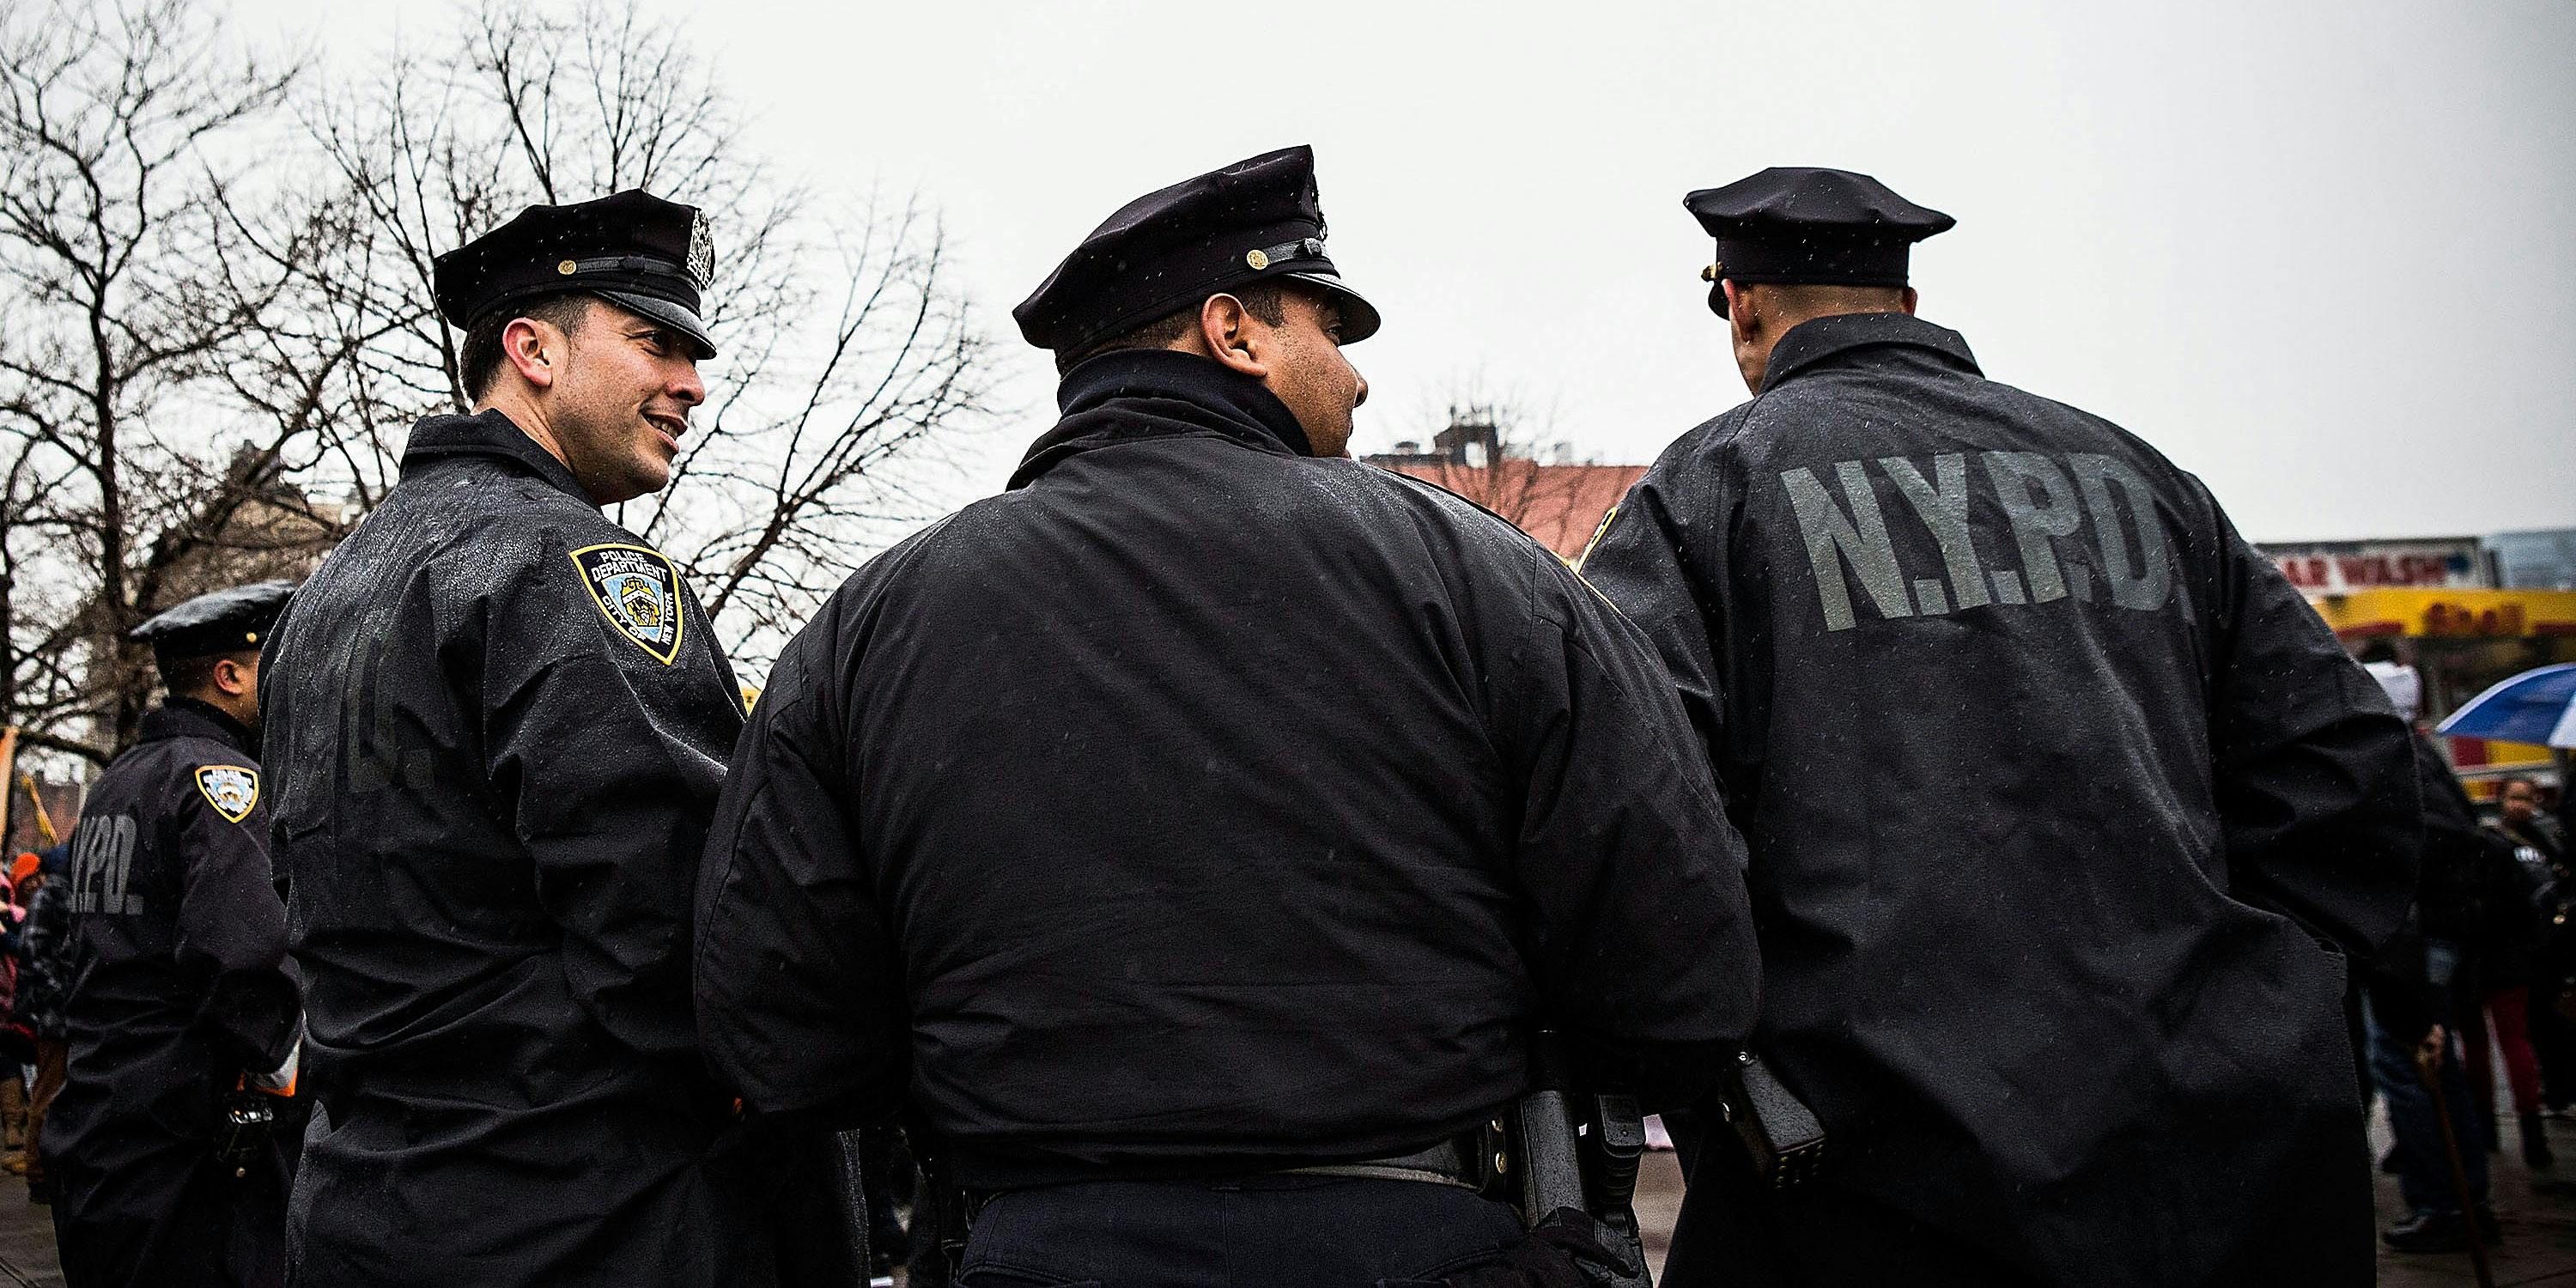 NYPD officers monitor a march against stop-and-frisk tactics used by police on February 23, 2013 in New York City. The march, which consisted of a few hundred people, started in the Bronx borough of New York and marched into the Harlem neighborhood of Manhattan. (Photo by Andrew Burton/Getty Images)